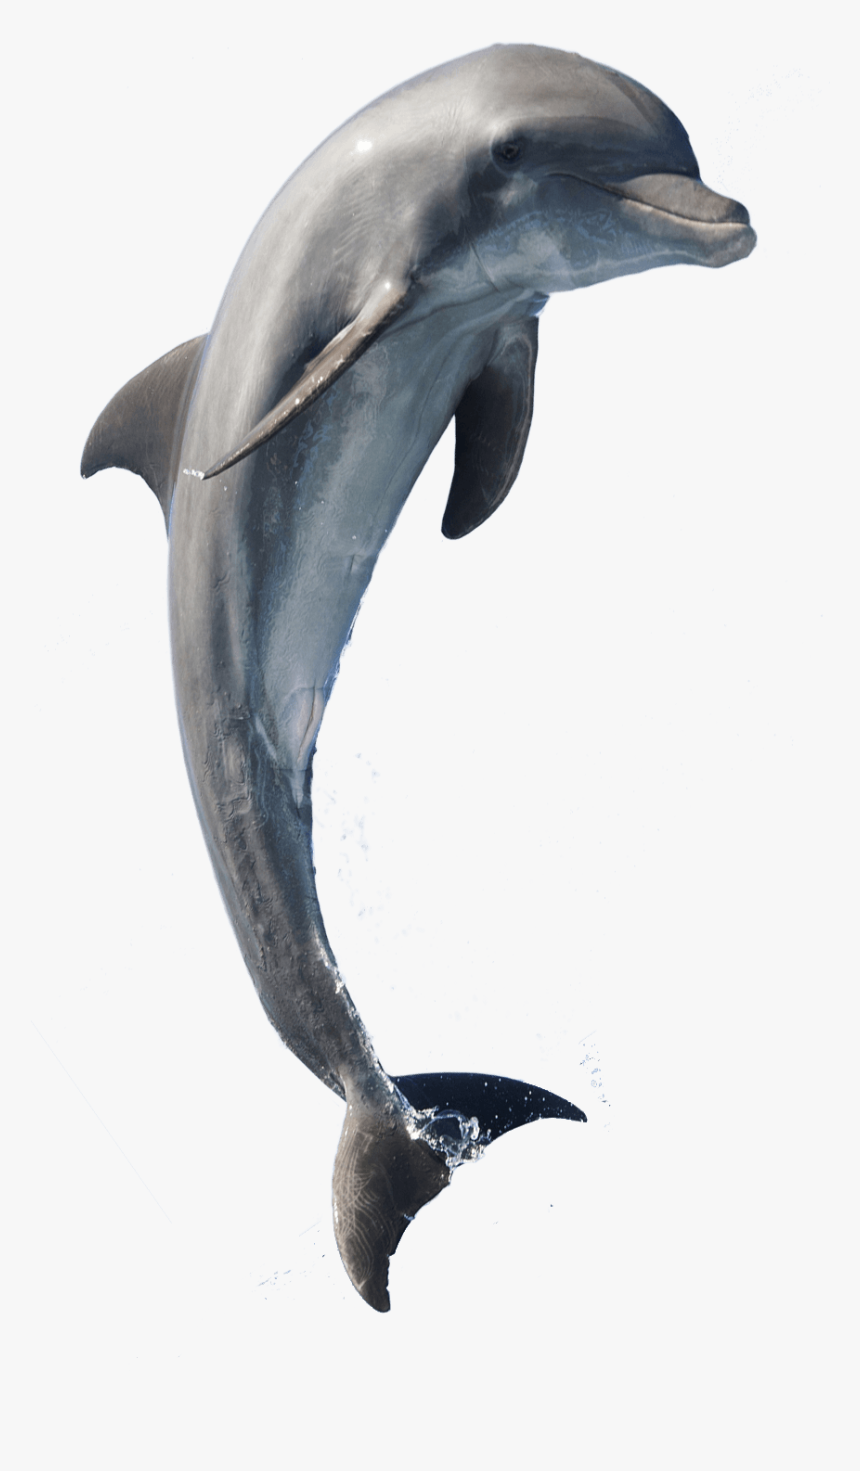 V - 6 - 1 209 - 8 Kbytes - Dolphin - Hd Type - Dolphins - Dolphin Jumping Transparent Background, HD Png Download, Free Download